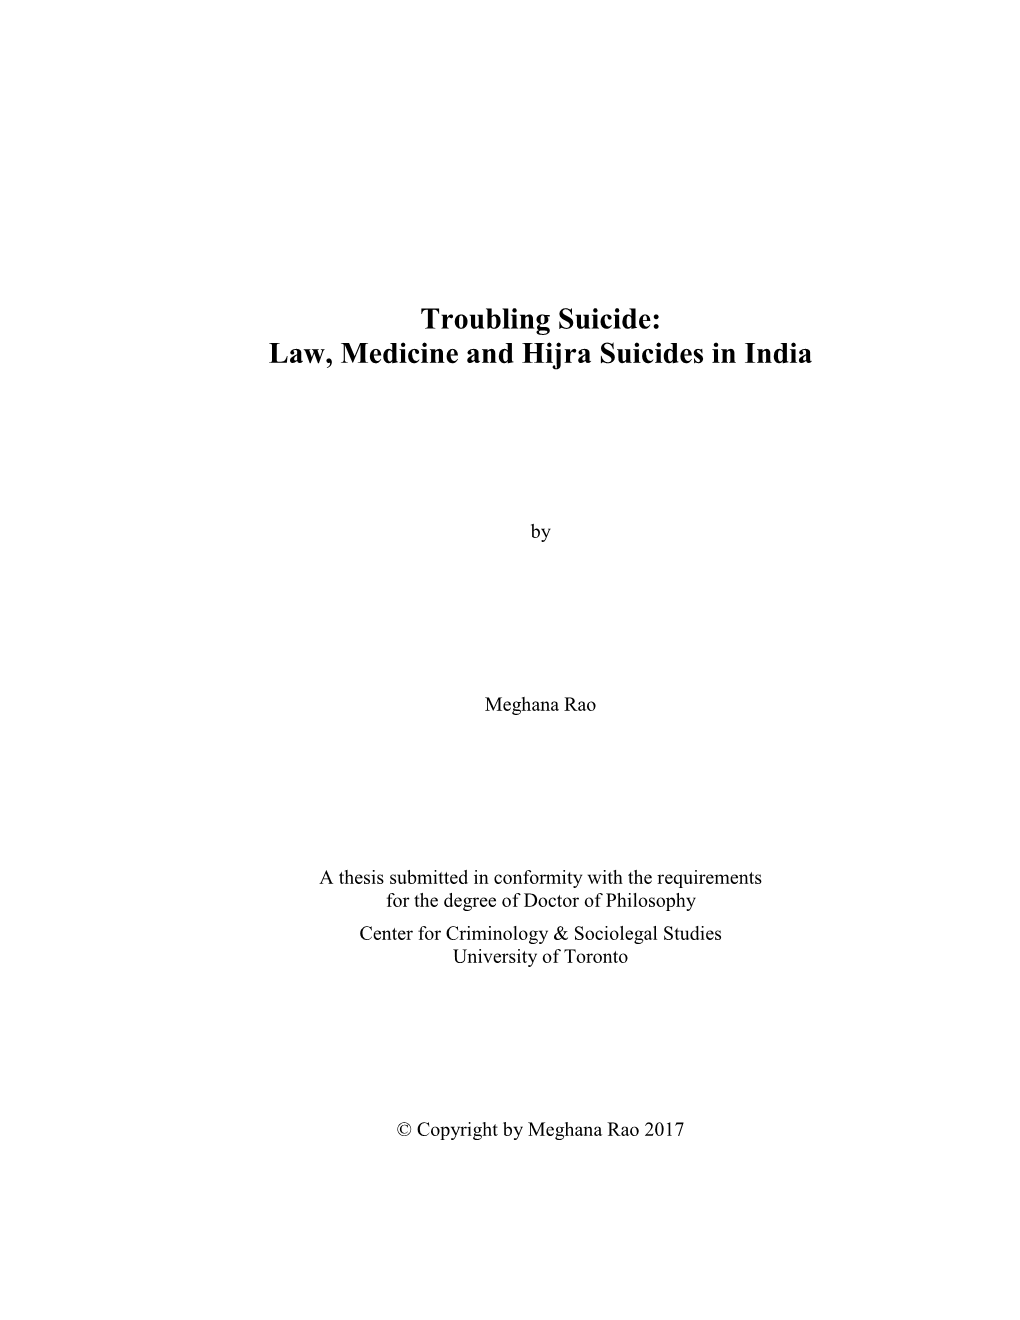 Law, Medicine and Hijra Suicides in India